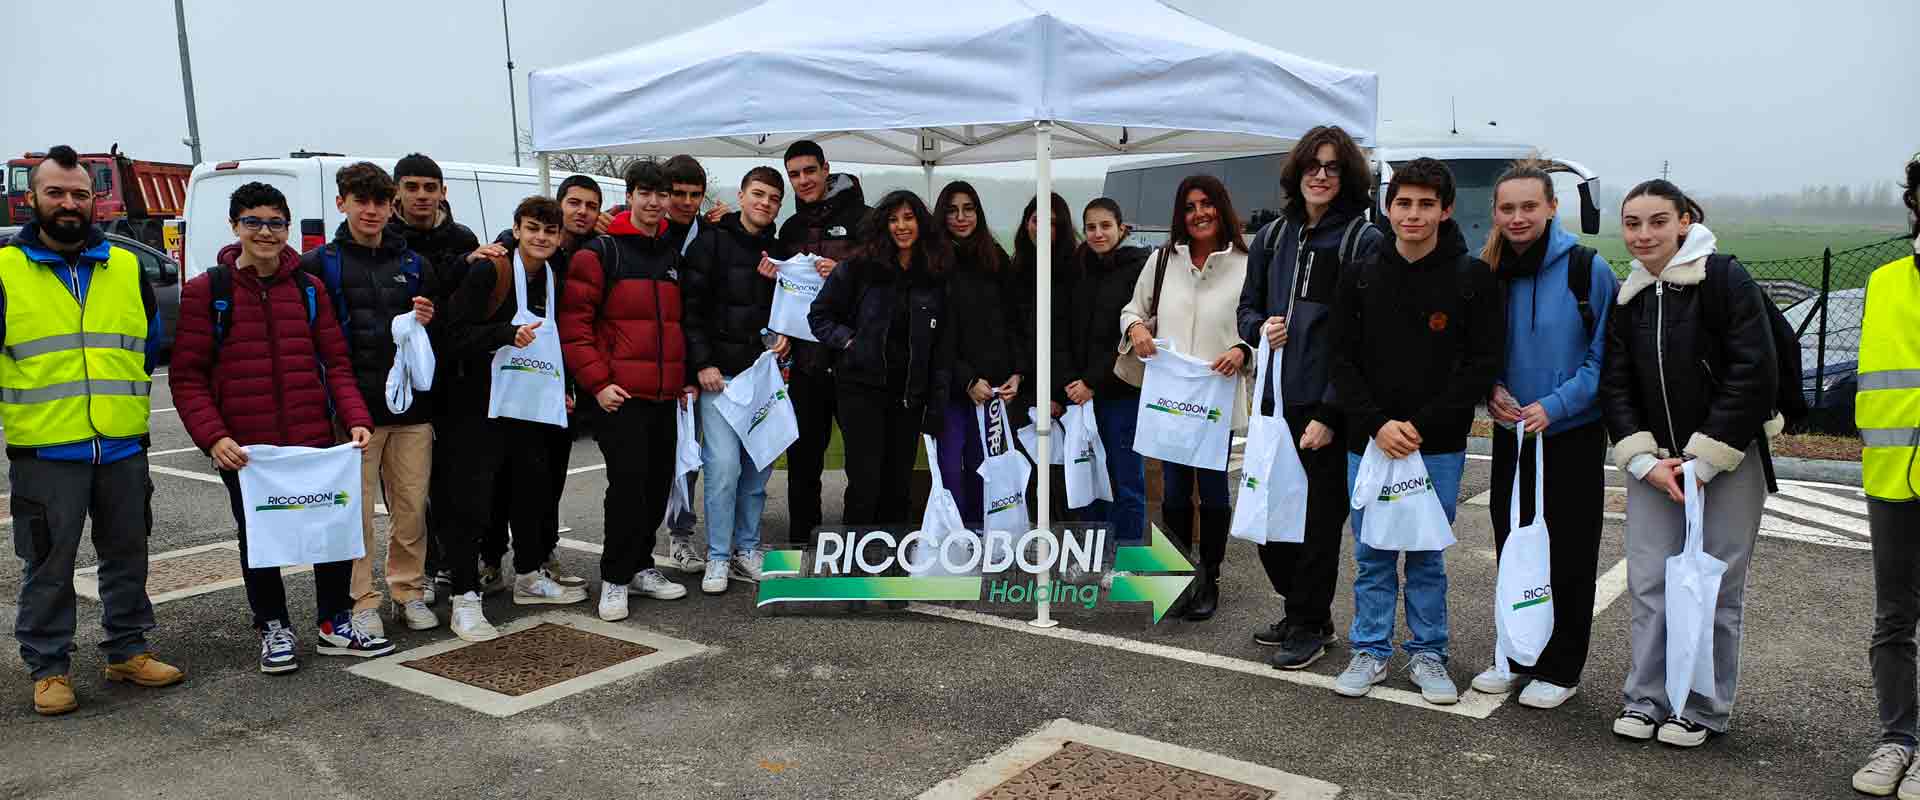 AN EDUCATIONAL PROJECT WAS PRESENTED IN THE PROVINCE OF ALESSANDRIA TO ENGAGE STUDENTS IN THE WORLD OF THE CIRCULAR ECONOMY